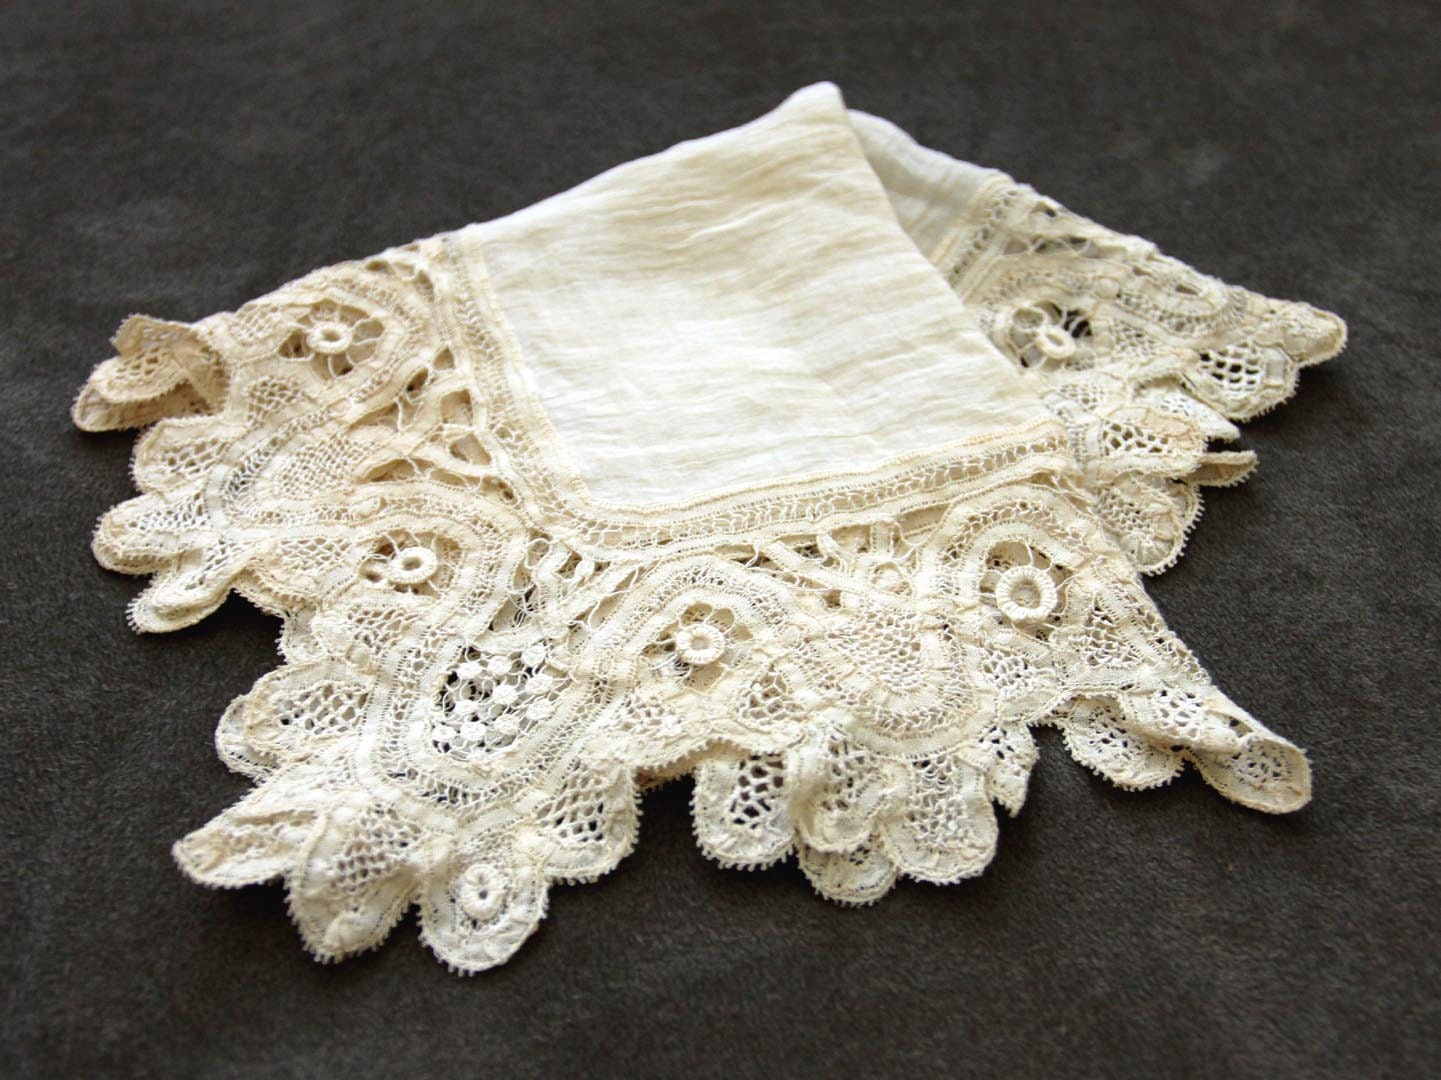 Silk and Lace Vintage Wedding Bridal Handkerchief - in Antique White / Ivory - Victorian Style - NewOrleansEclectics